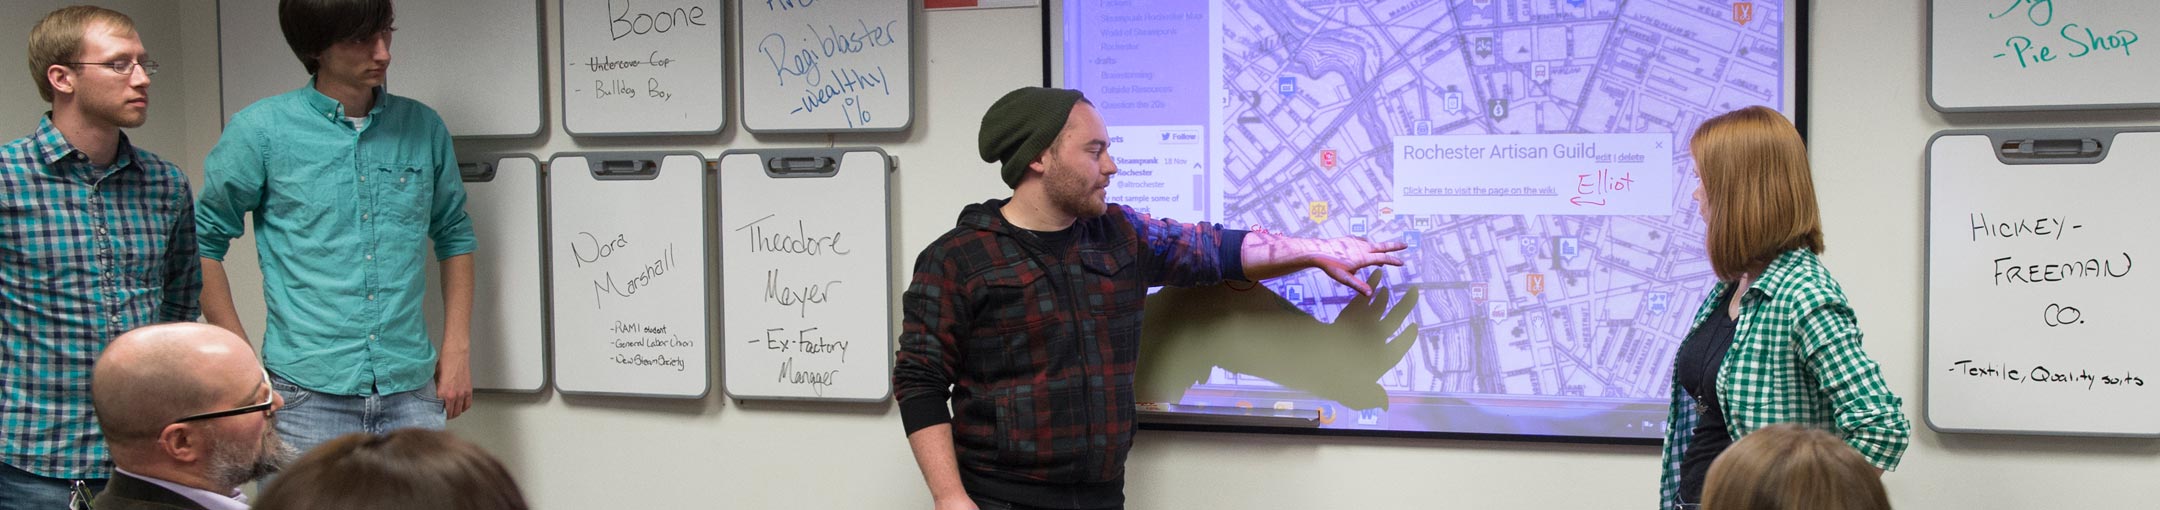 Student giving a presentation using a projector, pointing to an image of a Google map